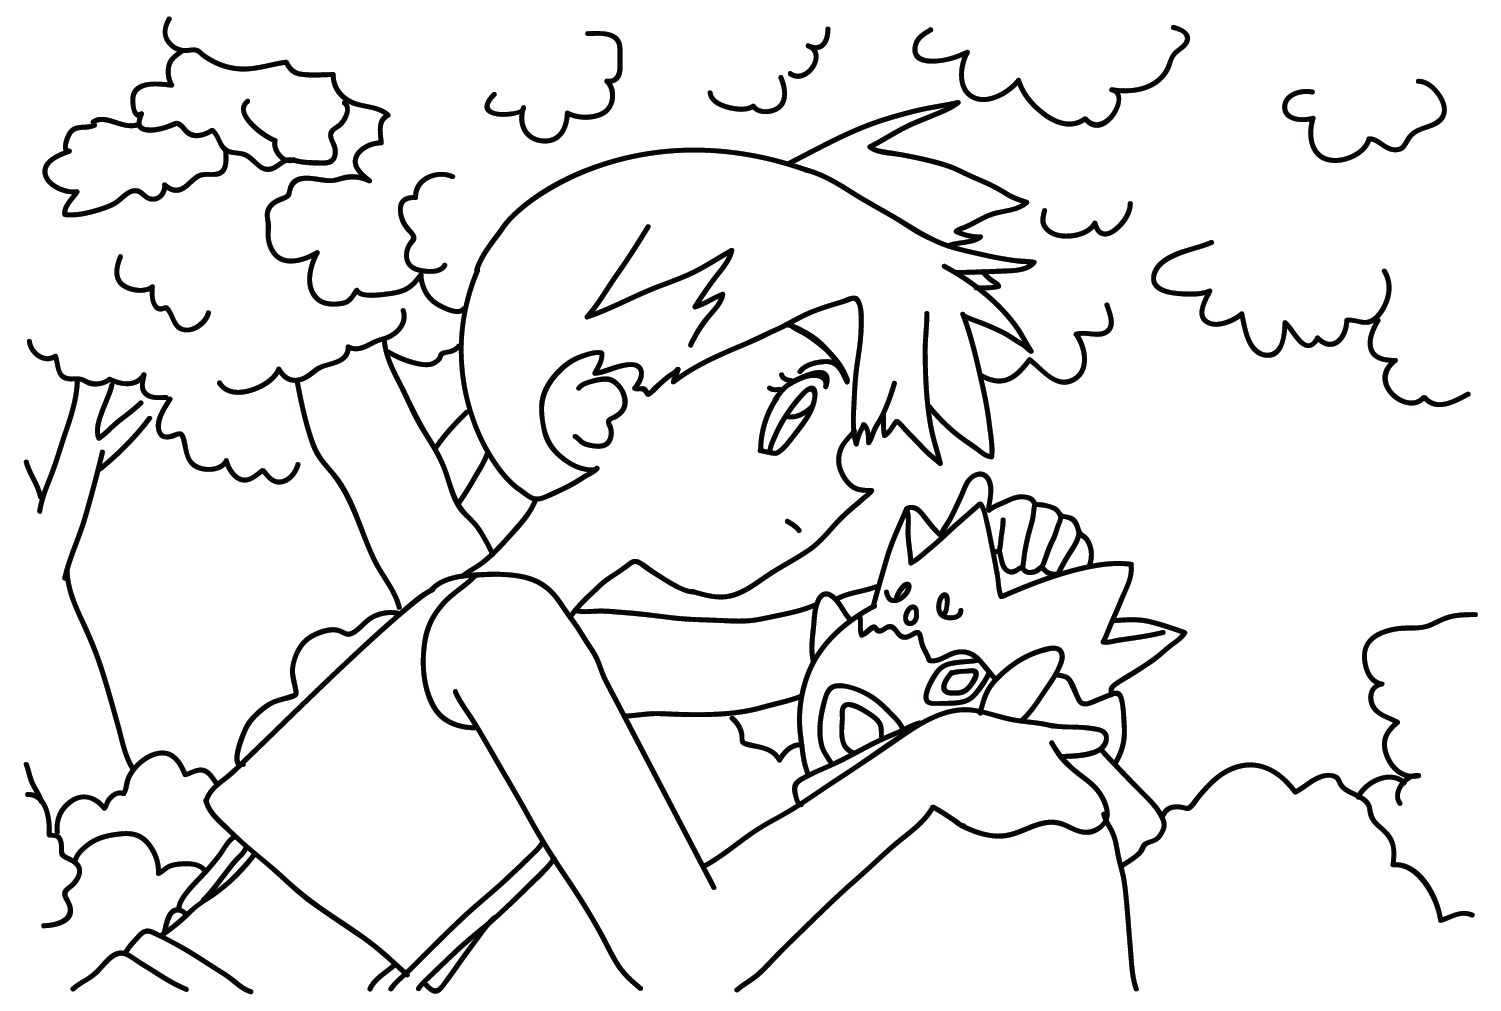 Misty Coloring Page Free Printable from Misty